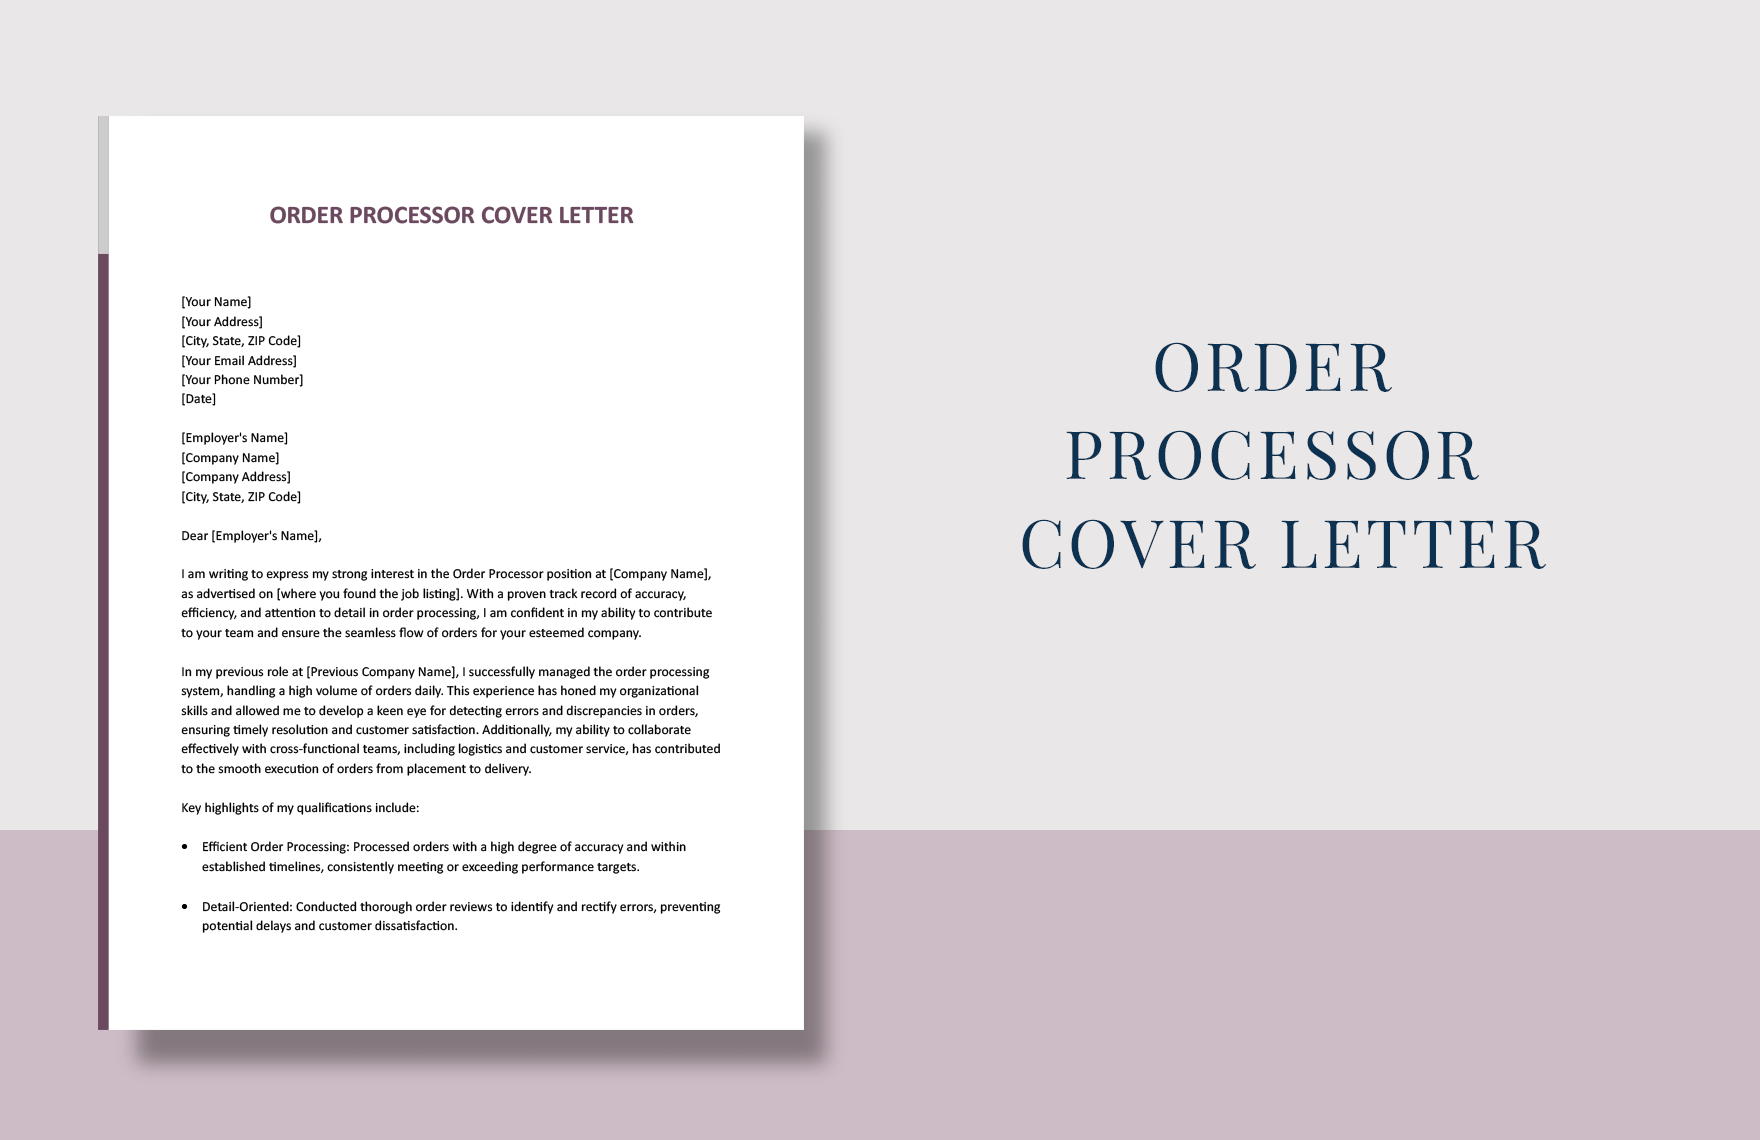 Order Processor Cover Letter in Word, Google Docs